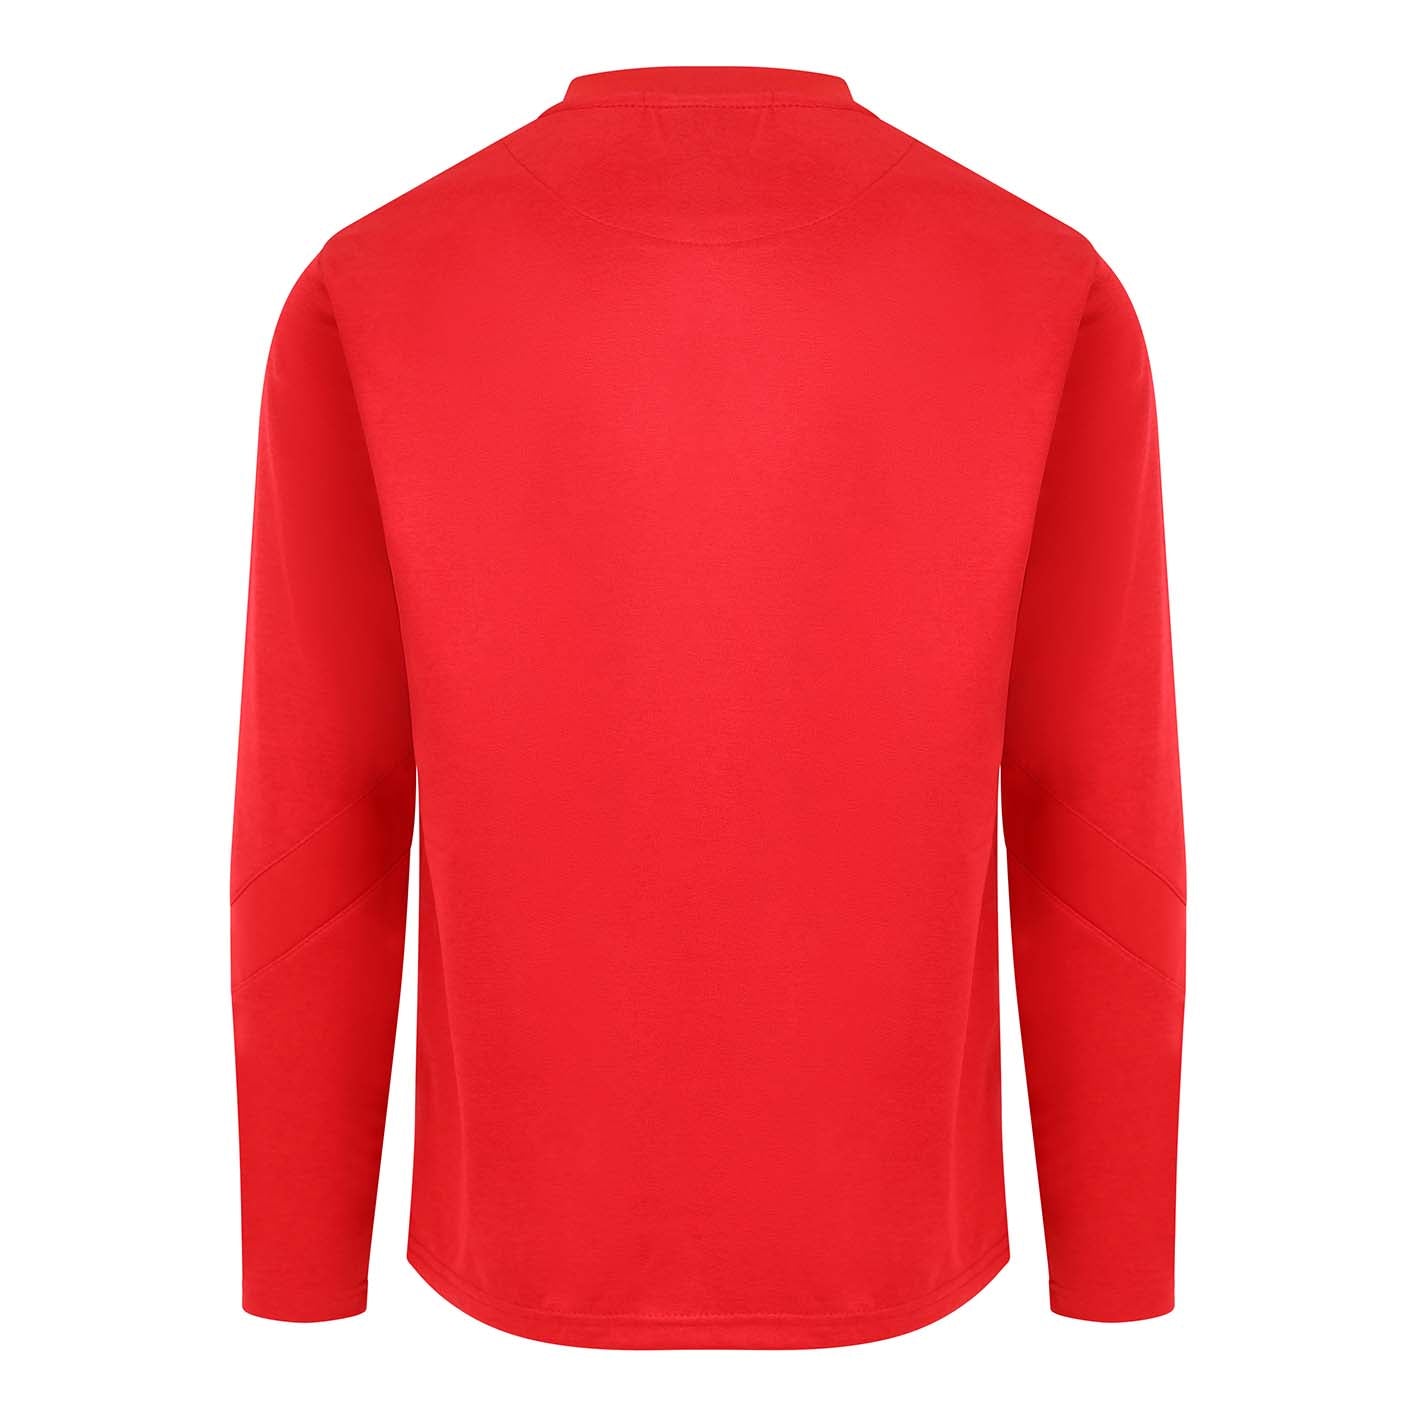 Mc Keever OMP United Core 22 Sweat Top - Adult - Red